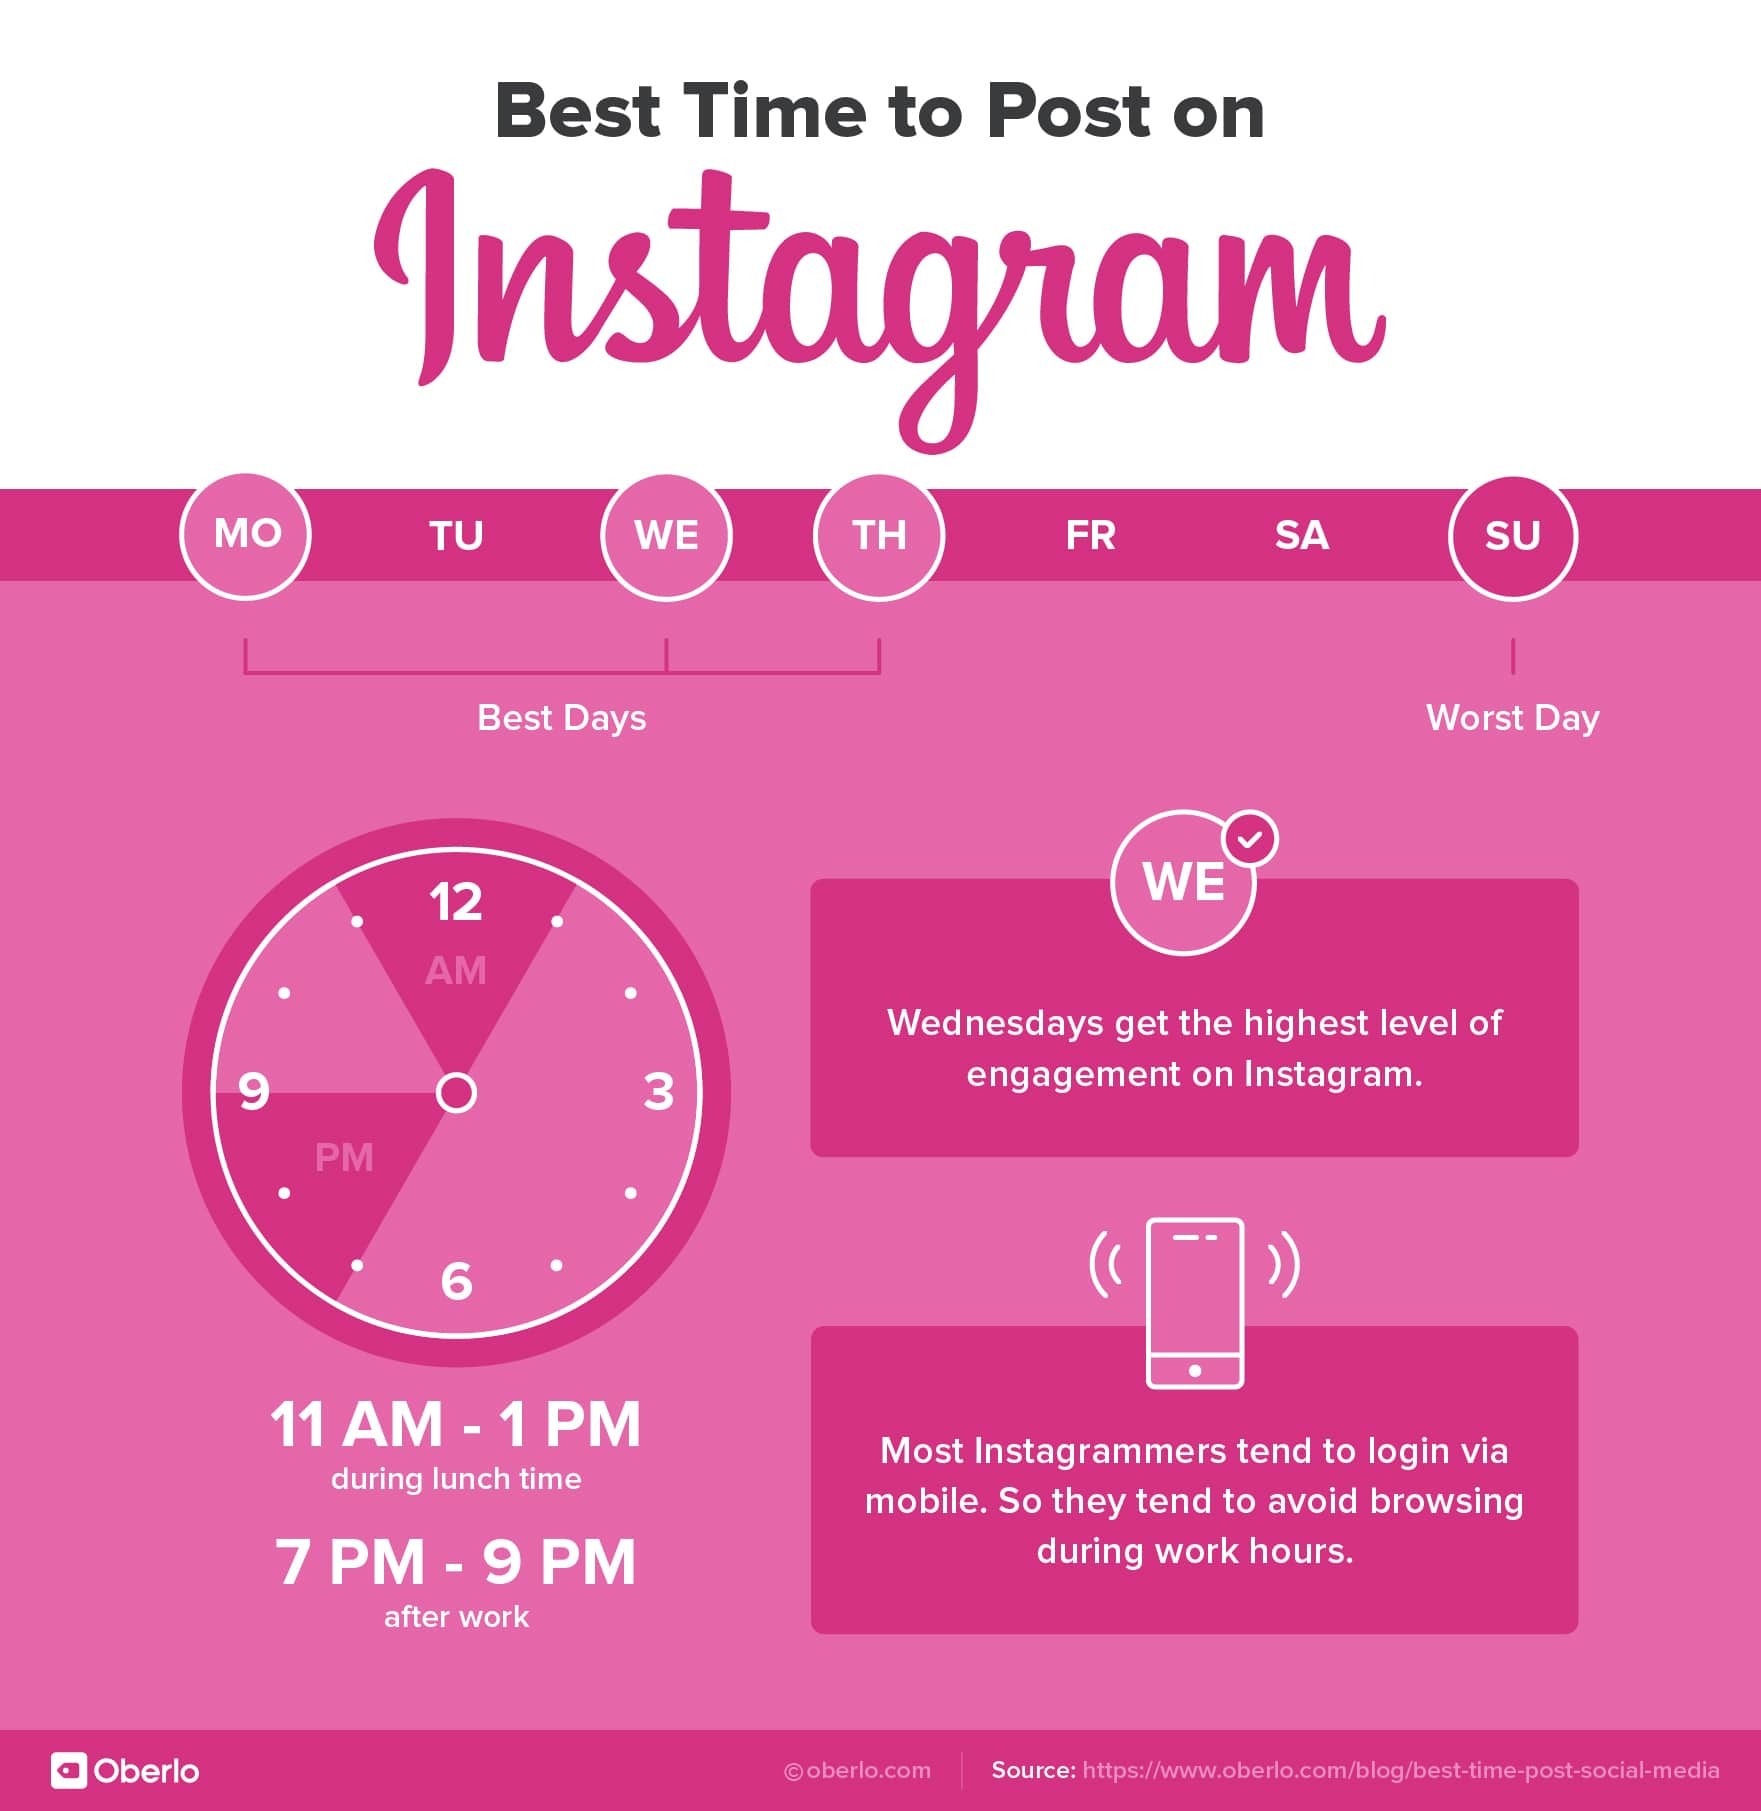 The best times to post on Instagram